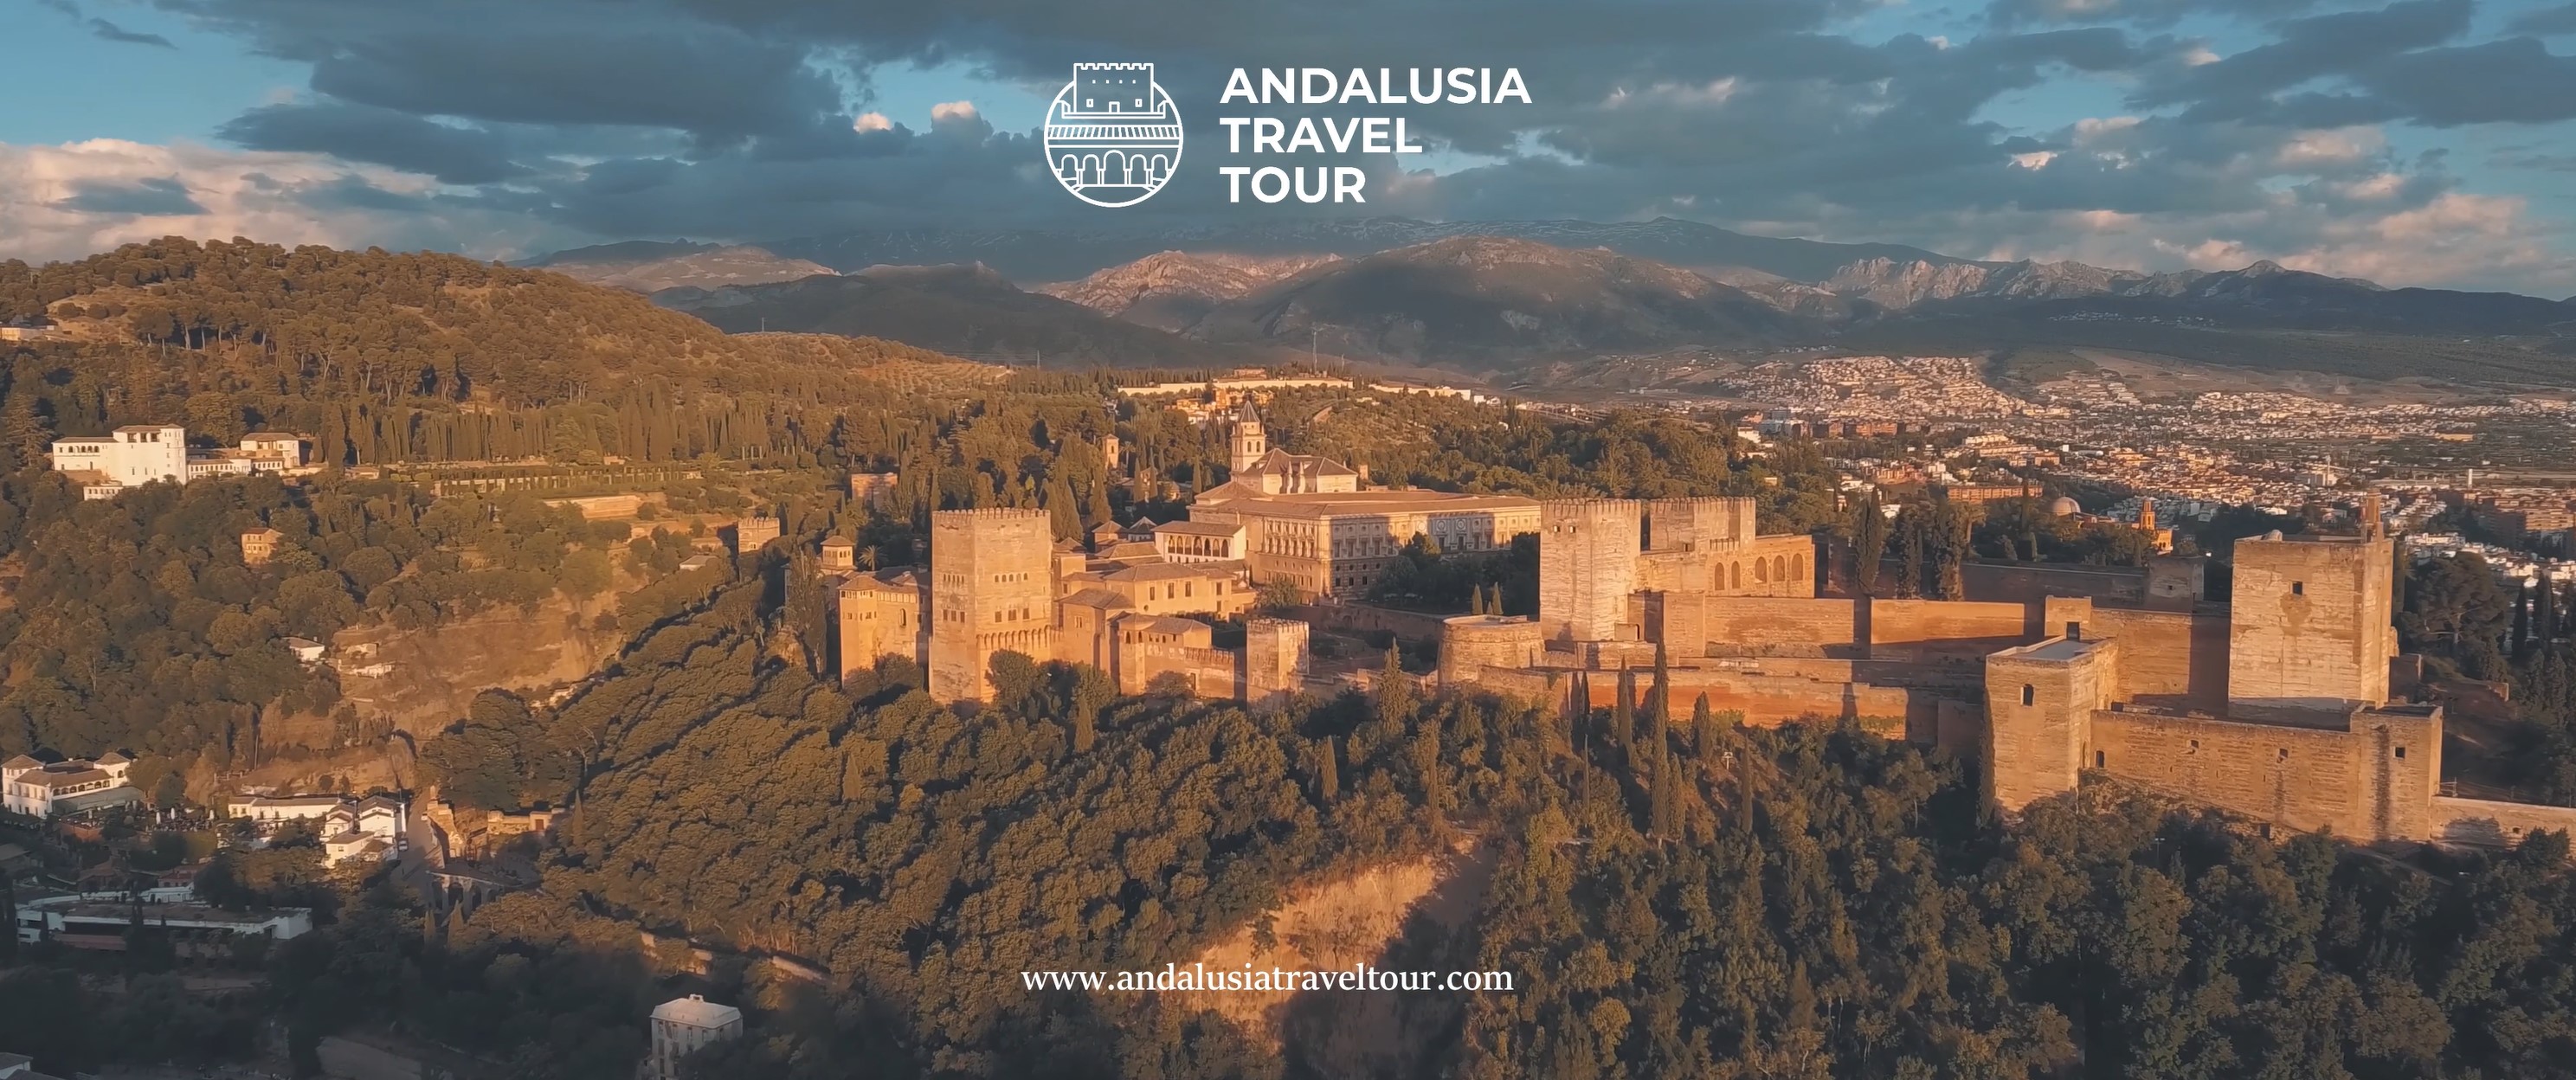 Andalusia Travel Tour